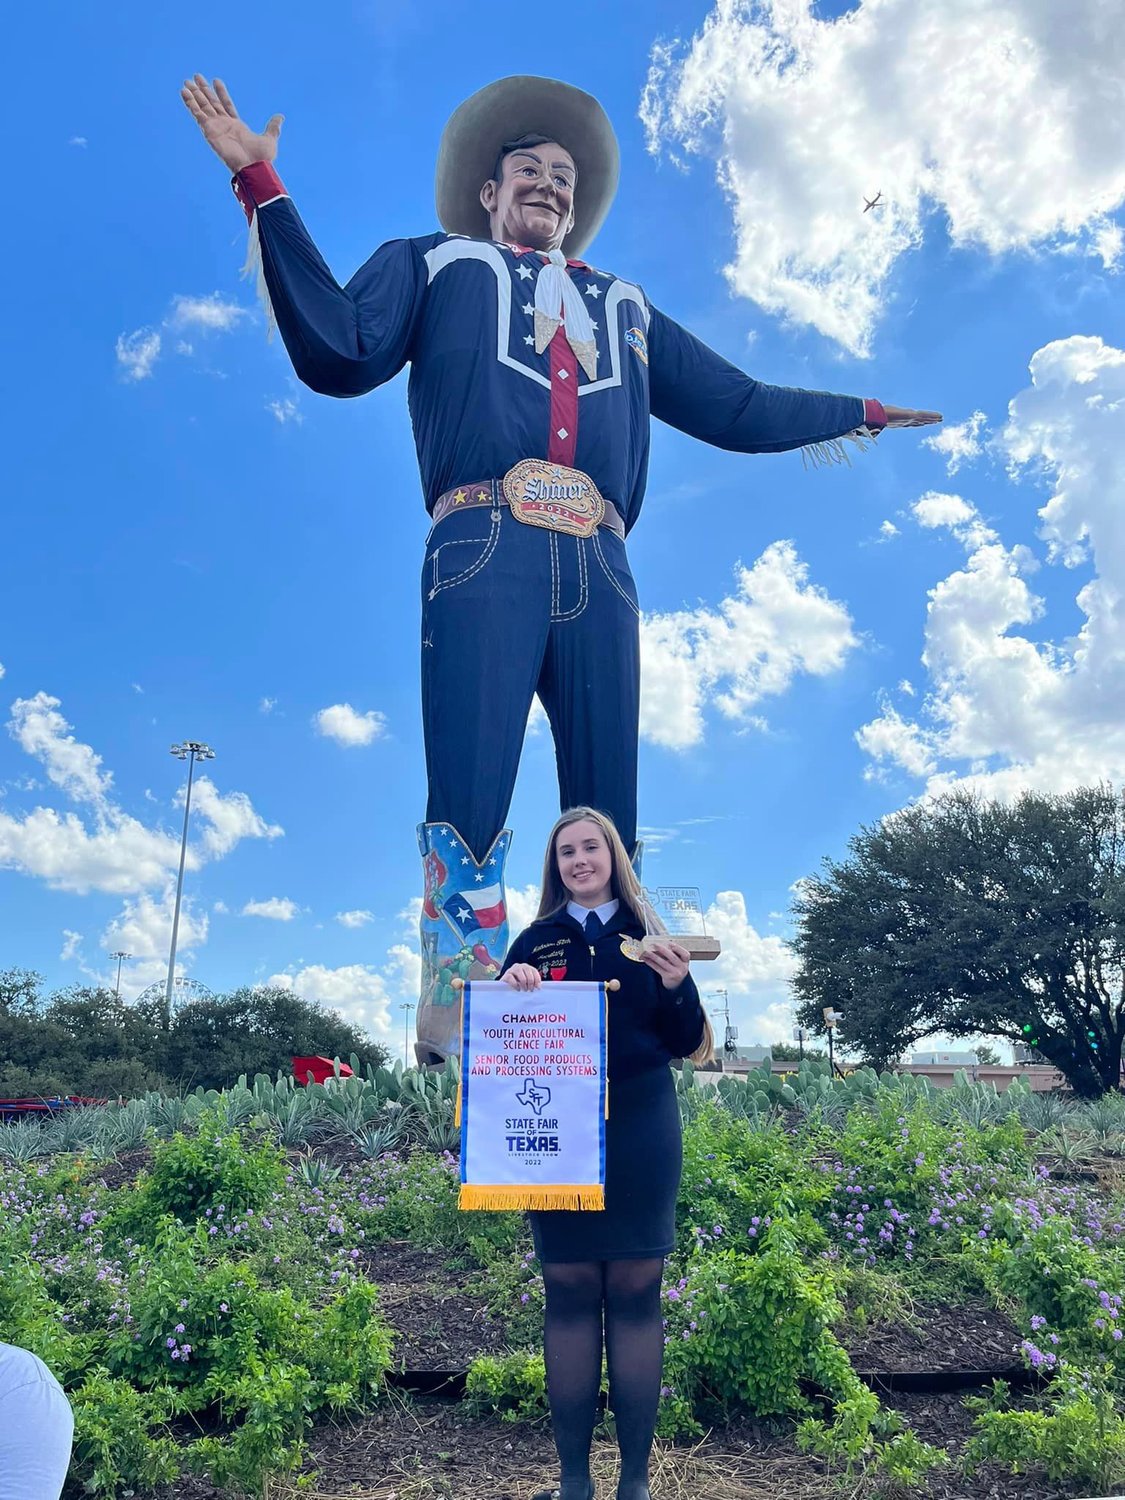 Madailein Fitch, a Taylor High student, poses with Big Tex at the State Fair of Texas in Dallas.